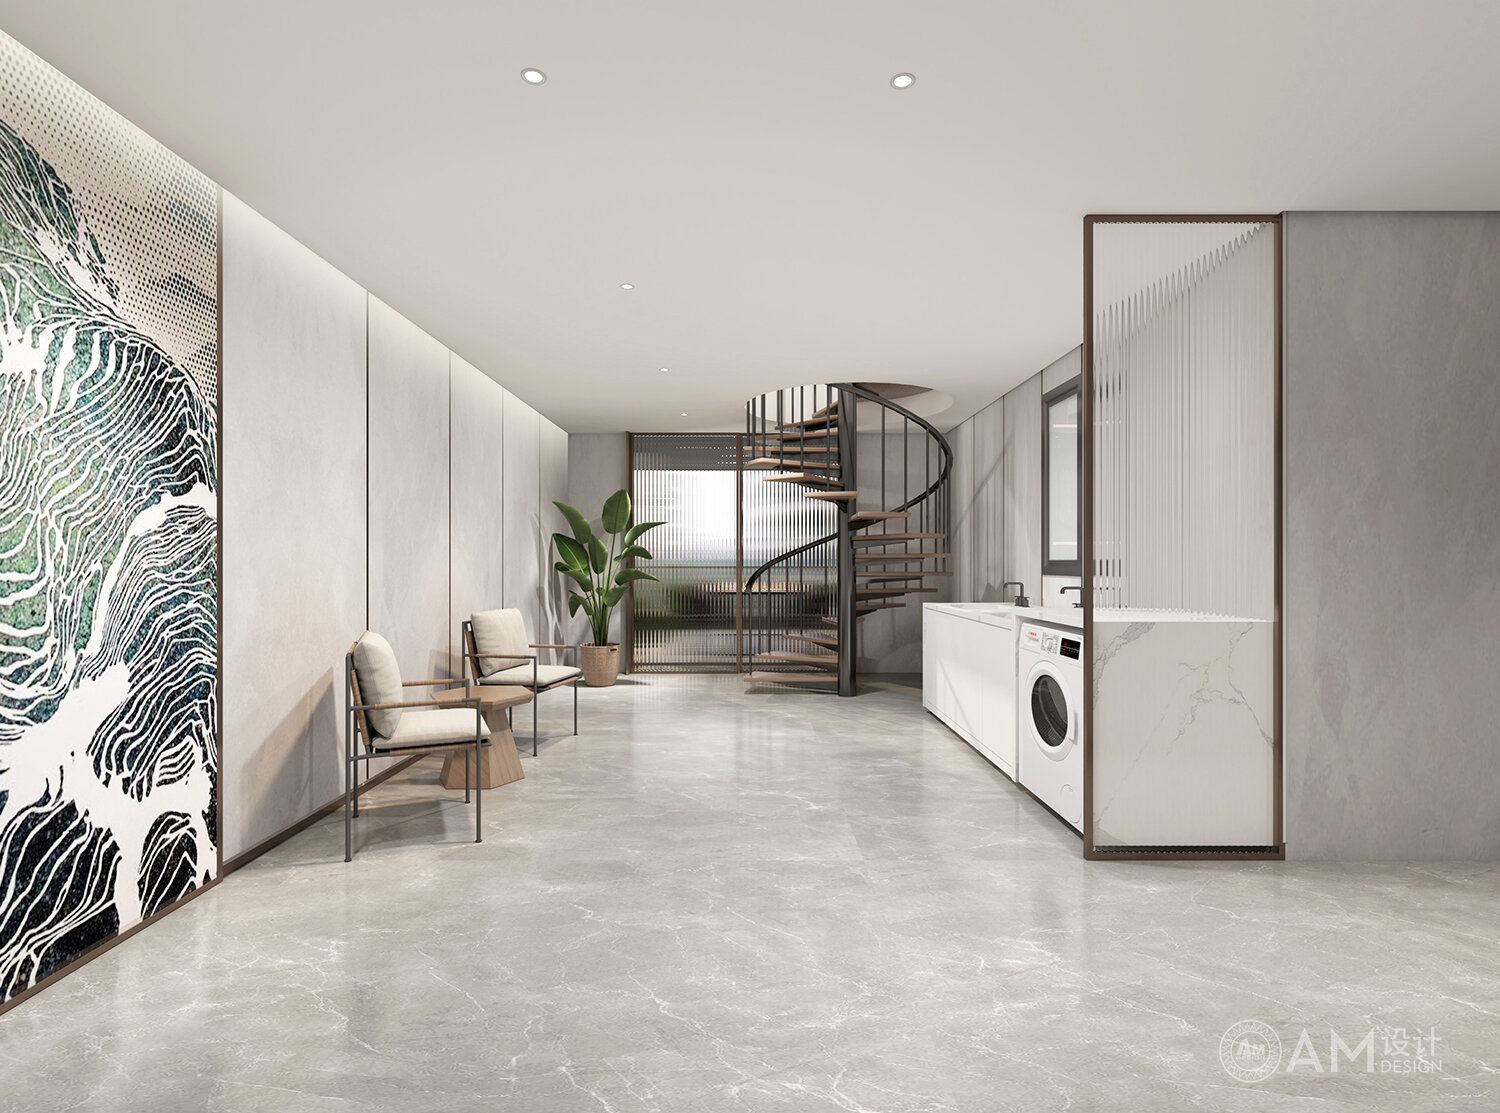 AM DESIGN | Shaanxi Shangluo Mansion Laundry Room & Staircase Design